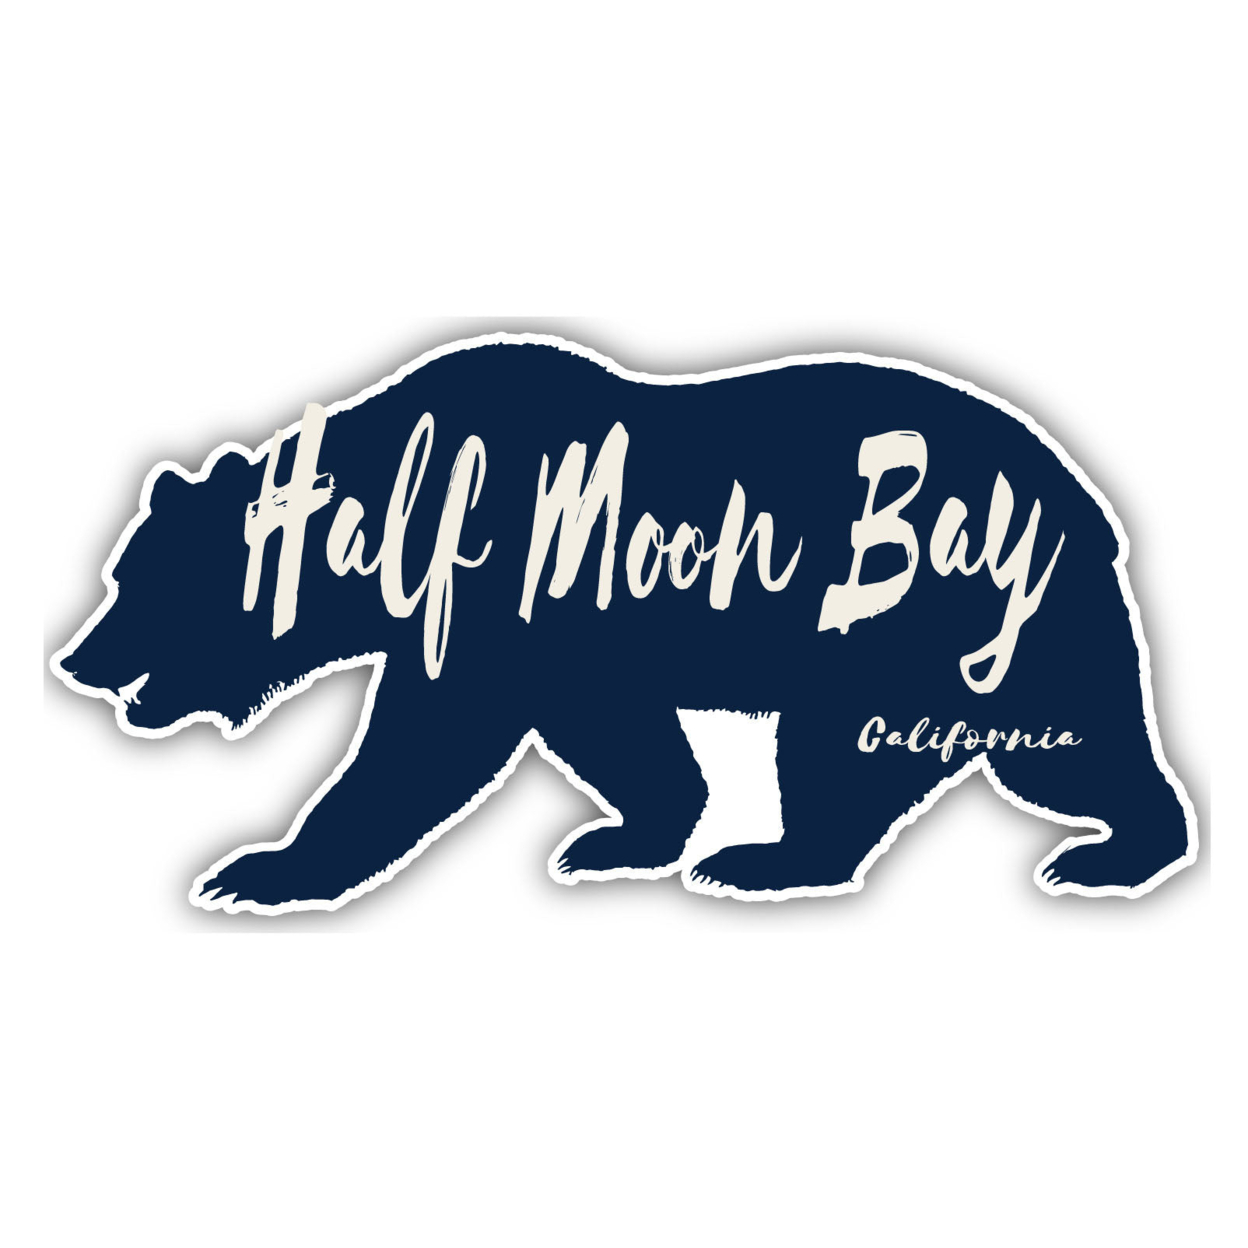 Half Moon Bay California Souvenir Decorative Stickers (Choose Theme And Size) - 4-Pack, 10-Inch, Tent